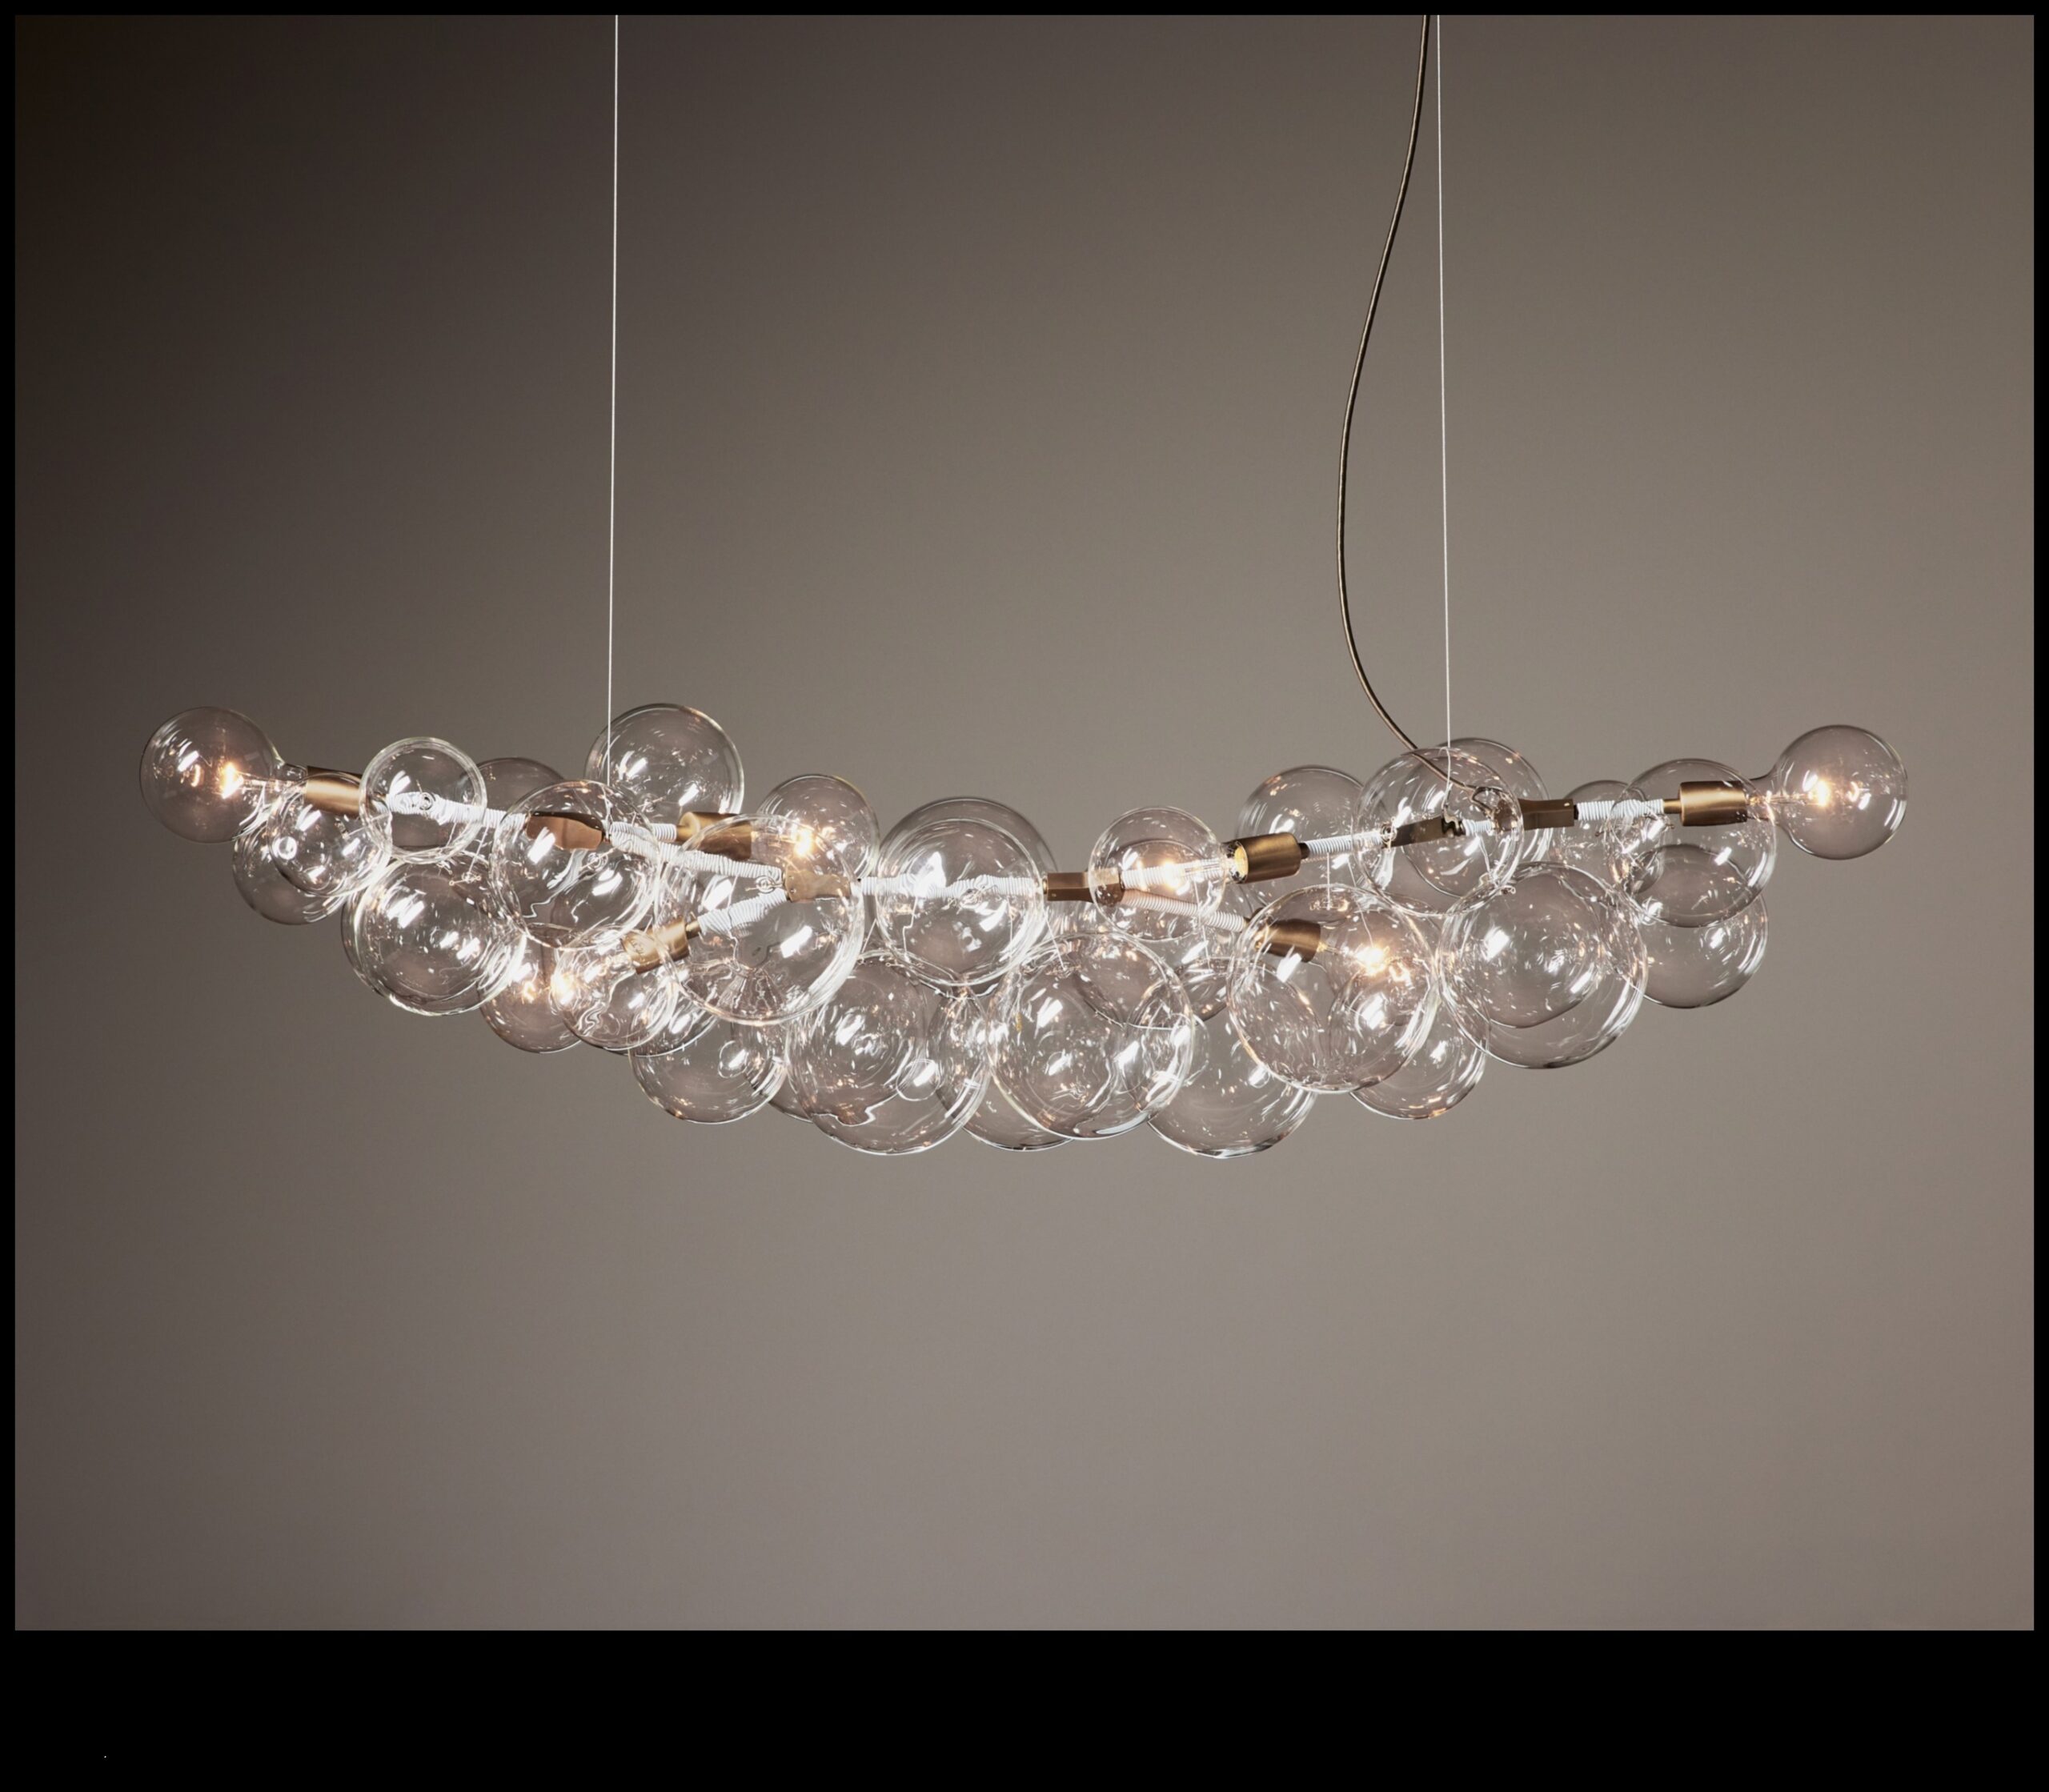 Ethereal Illumination: Transforming Spaces with Bubble Chandeliers